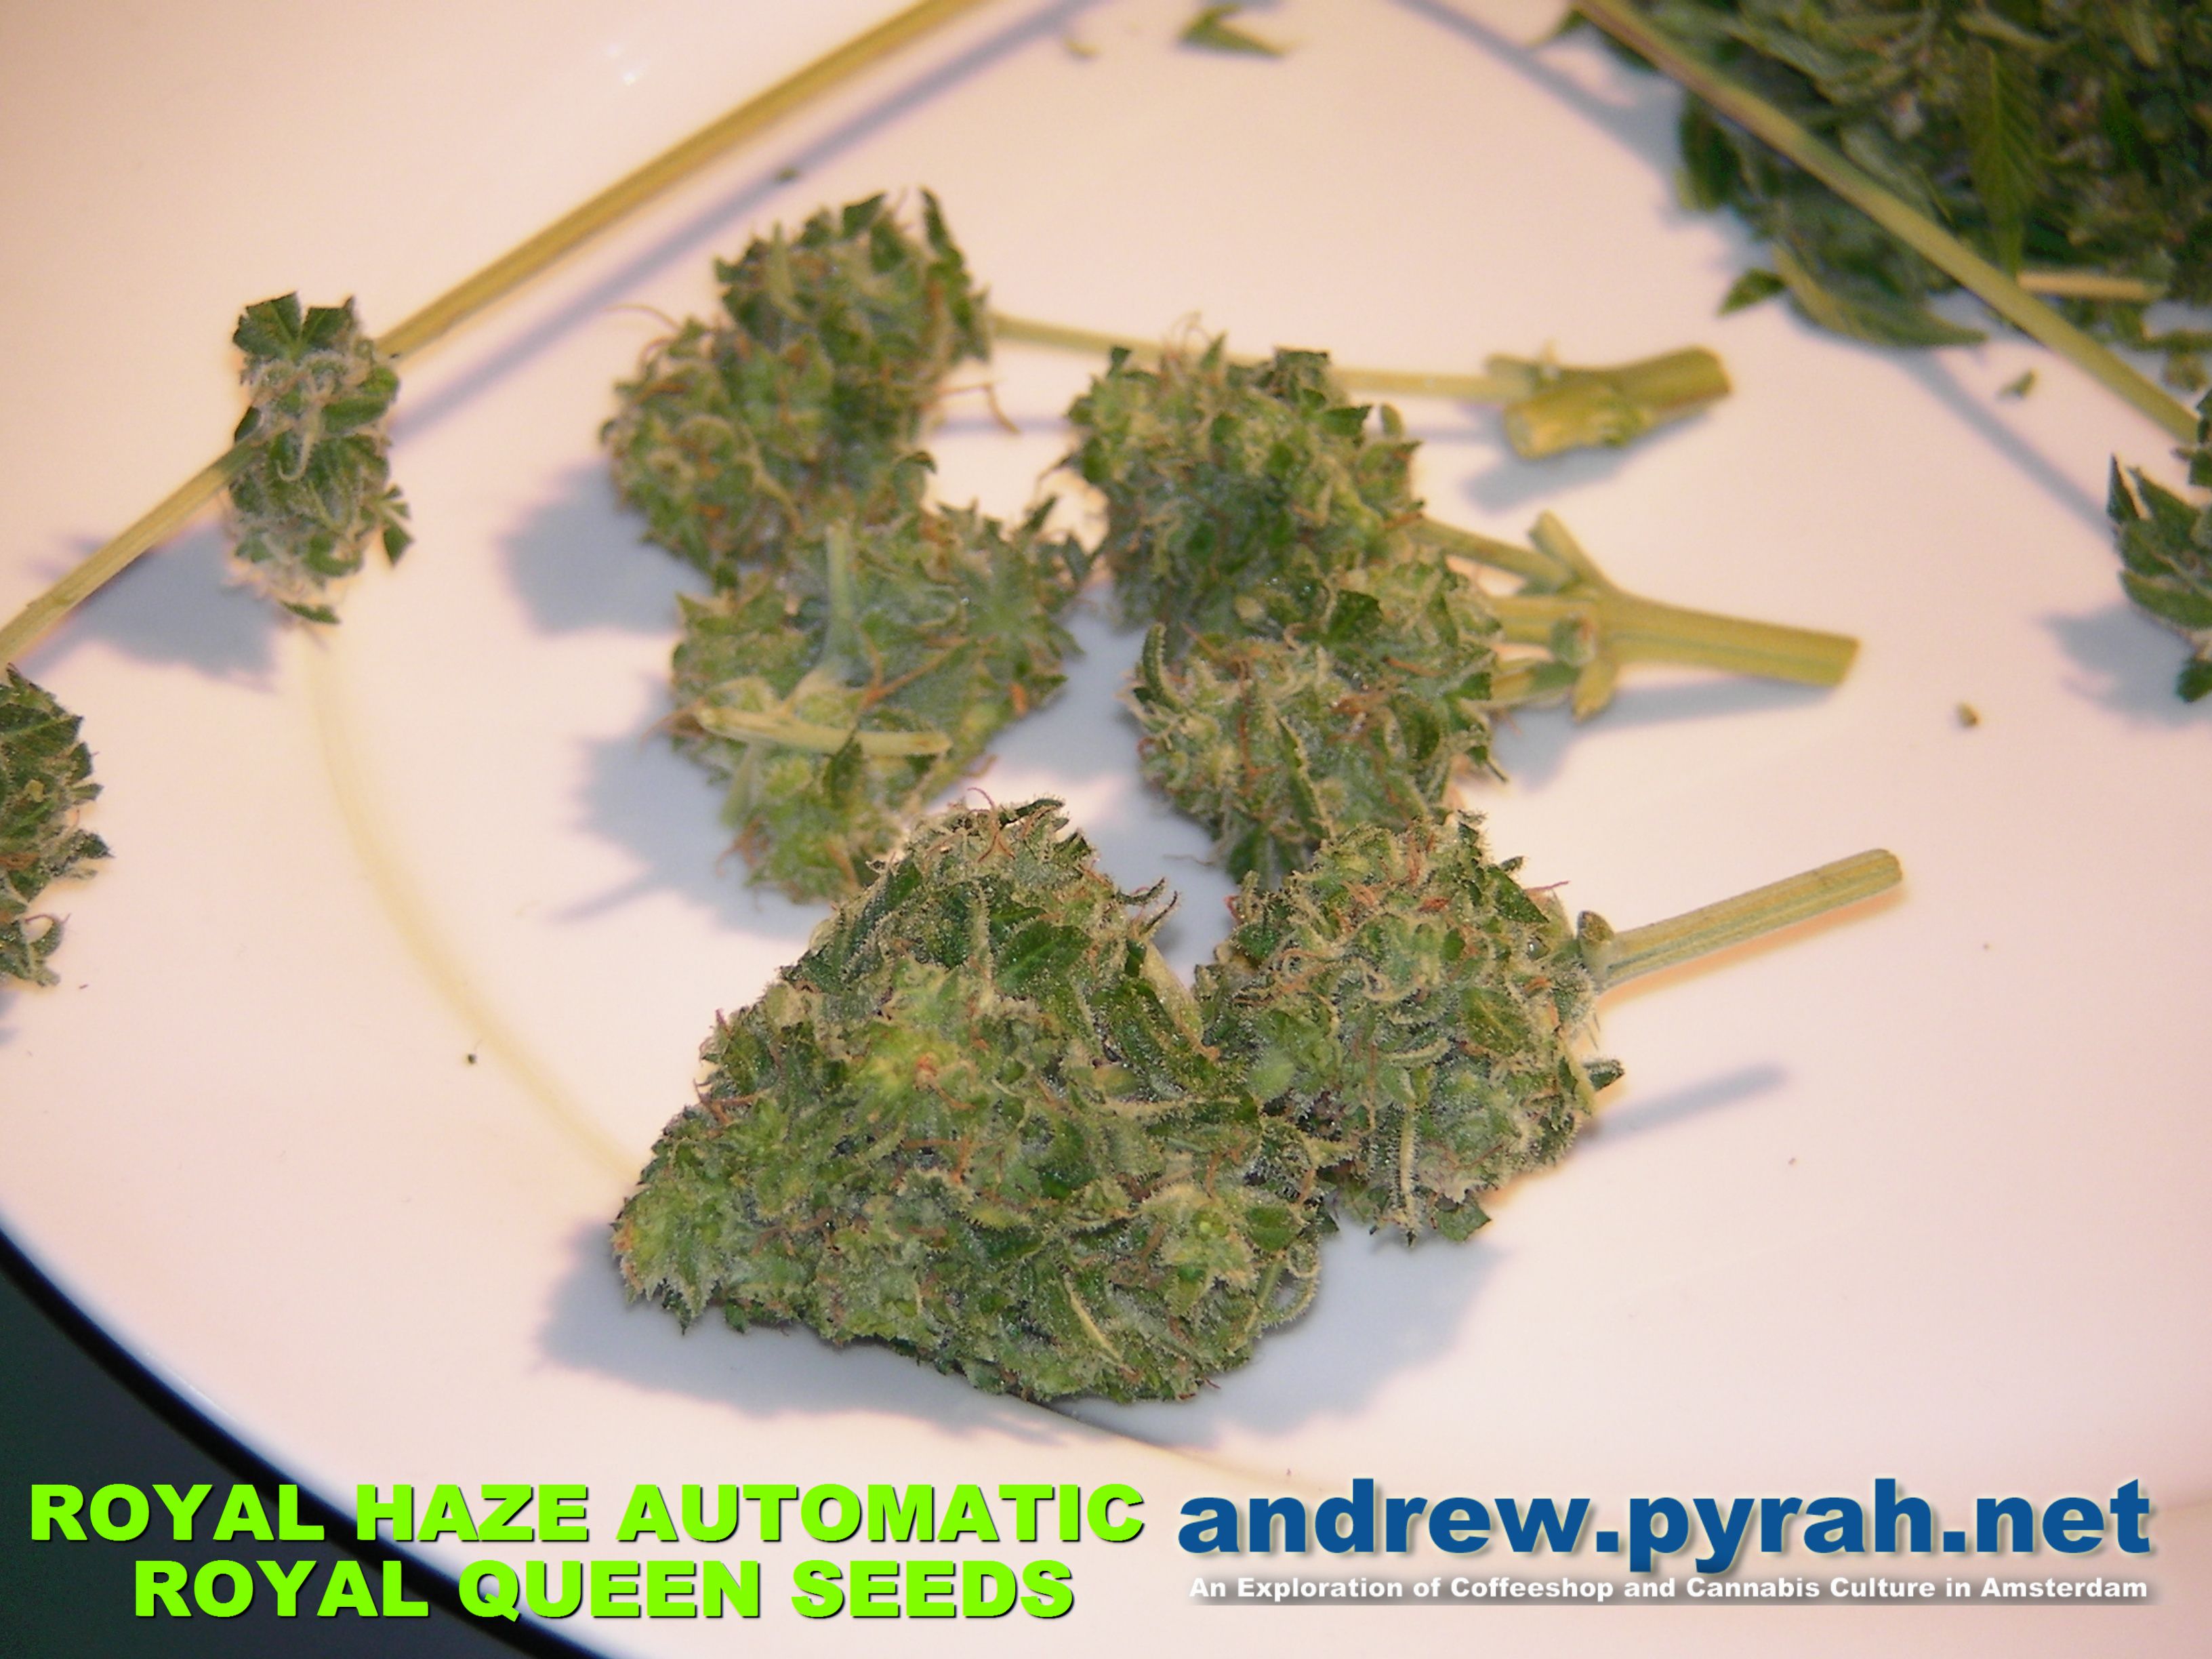 Royal Haze Automatic THE GROW – The Harvest Part 2 of 2